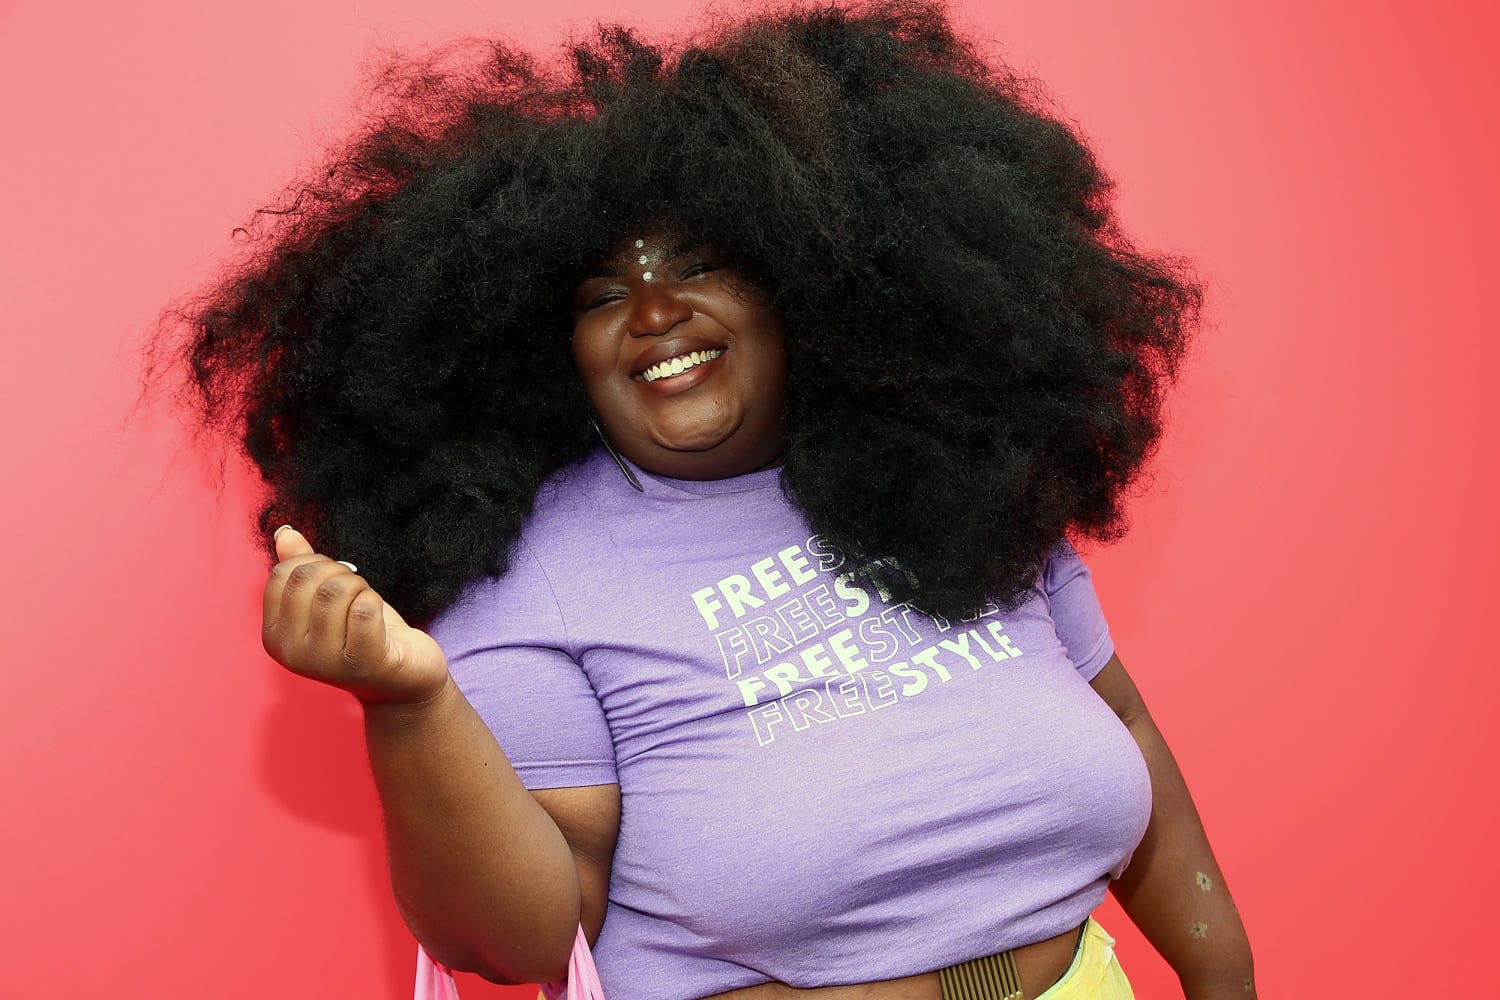 CurlFest 2018 helped women embrace their natural curly hair